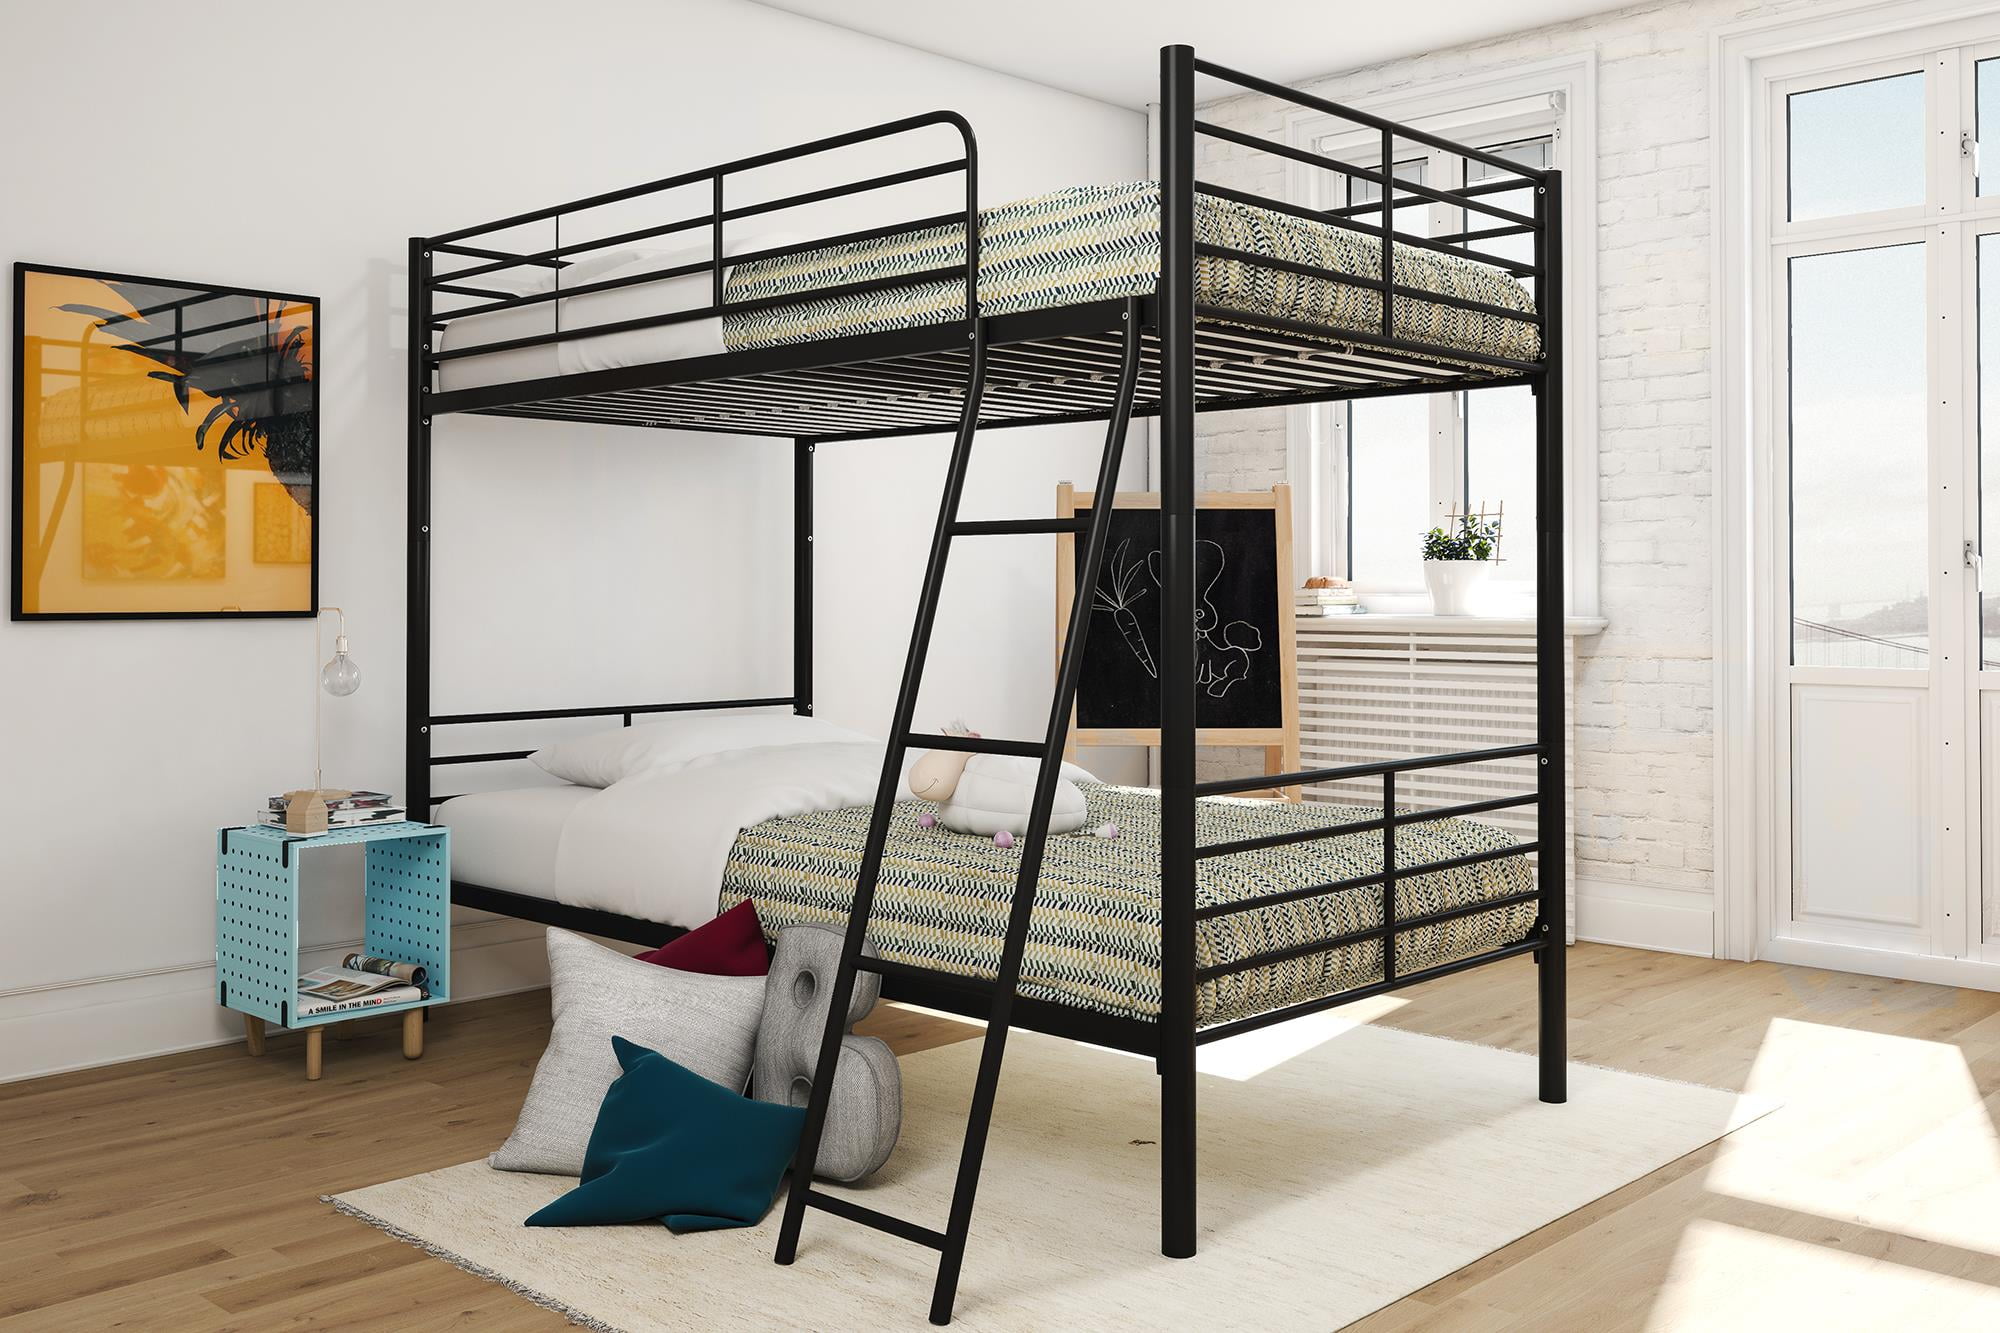 Mainstays Convertible Metal Twin Over, Is A Bunk Bed Mattress The Same Size As Twin